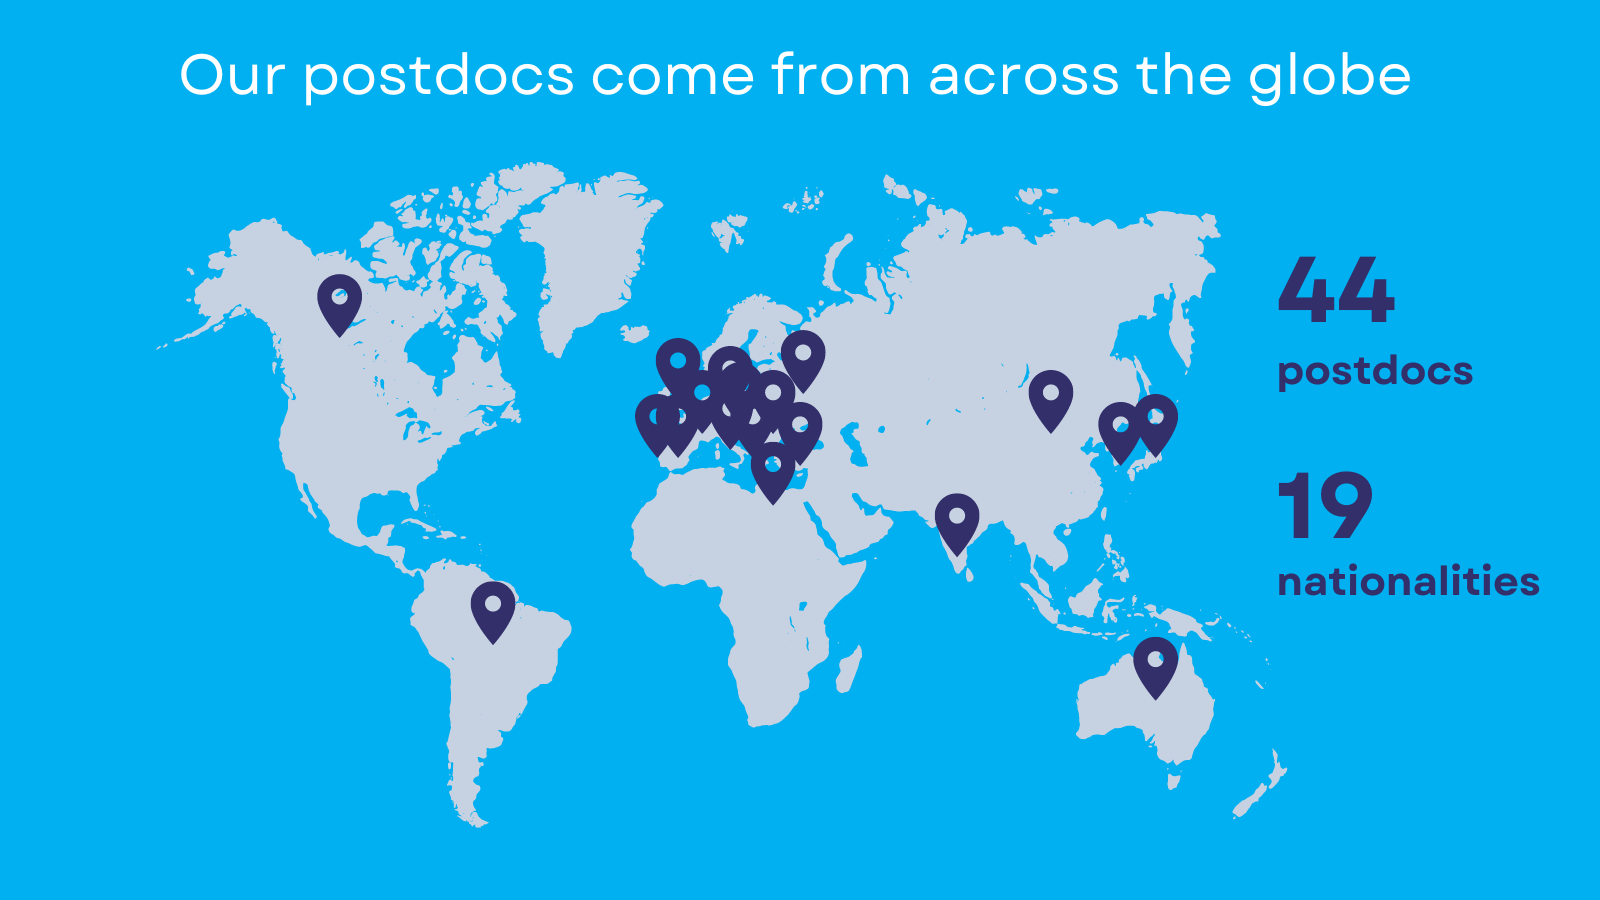 Postdoc nationalities marked on a global map